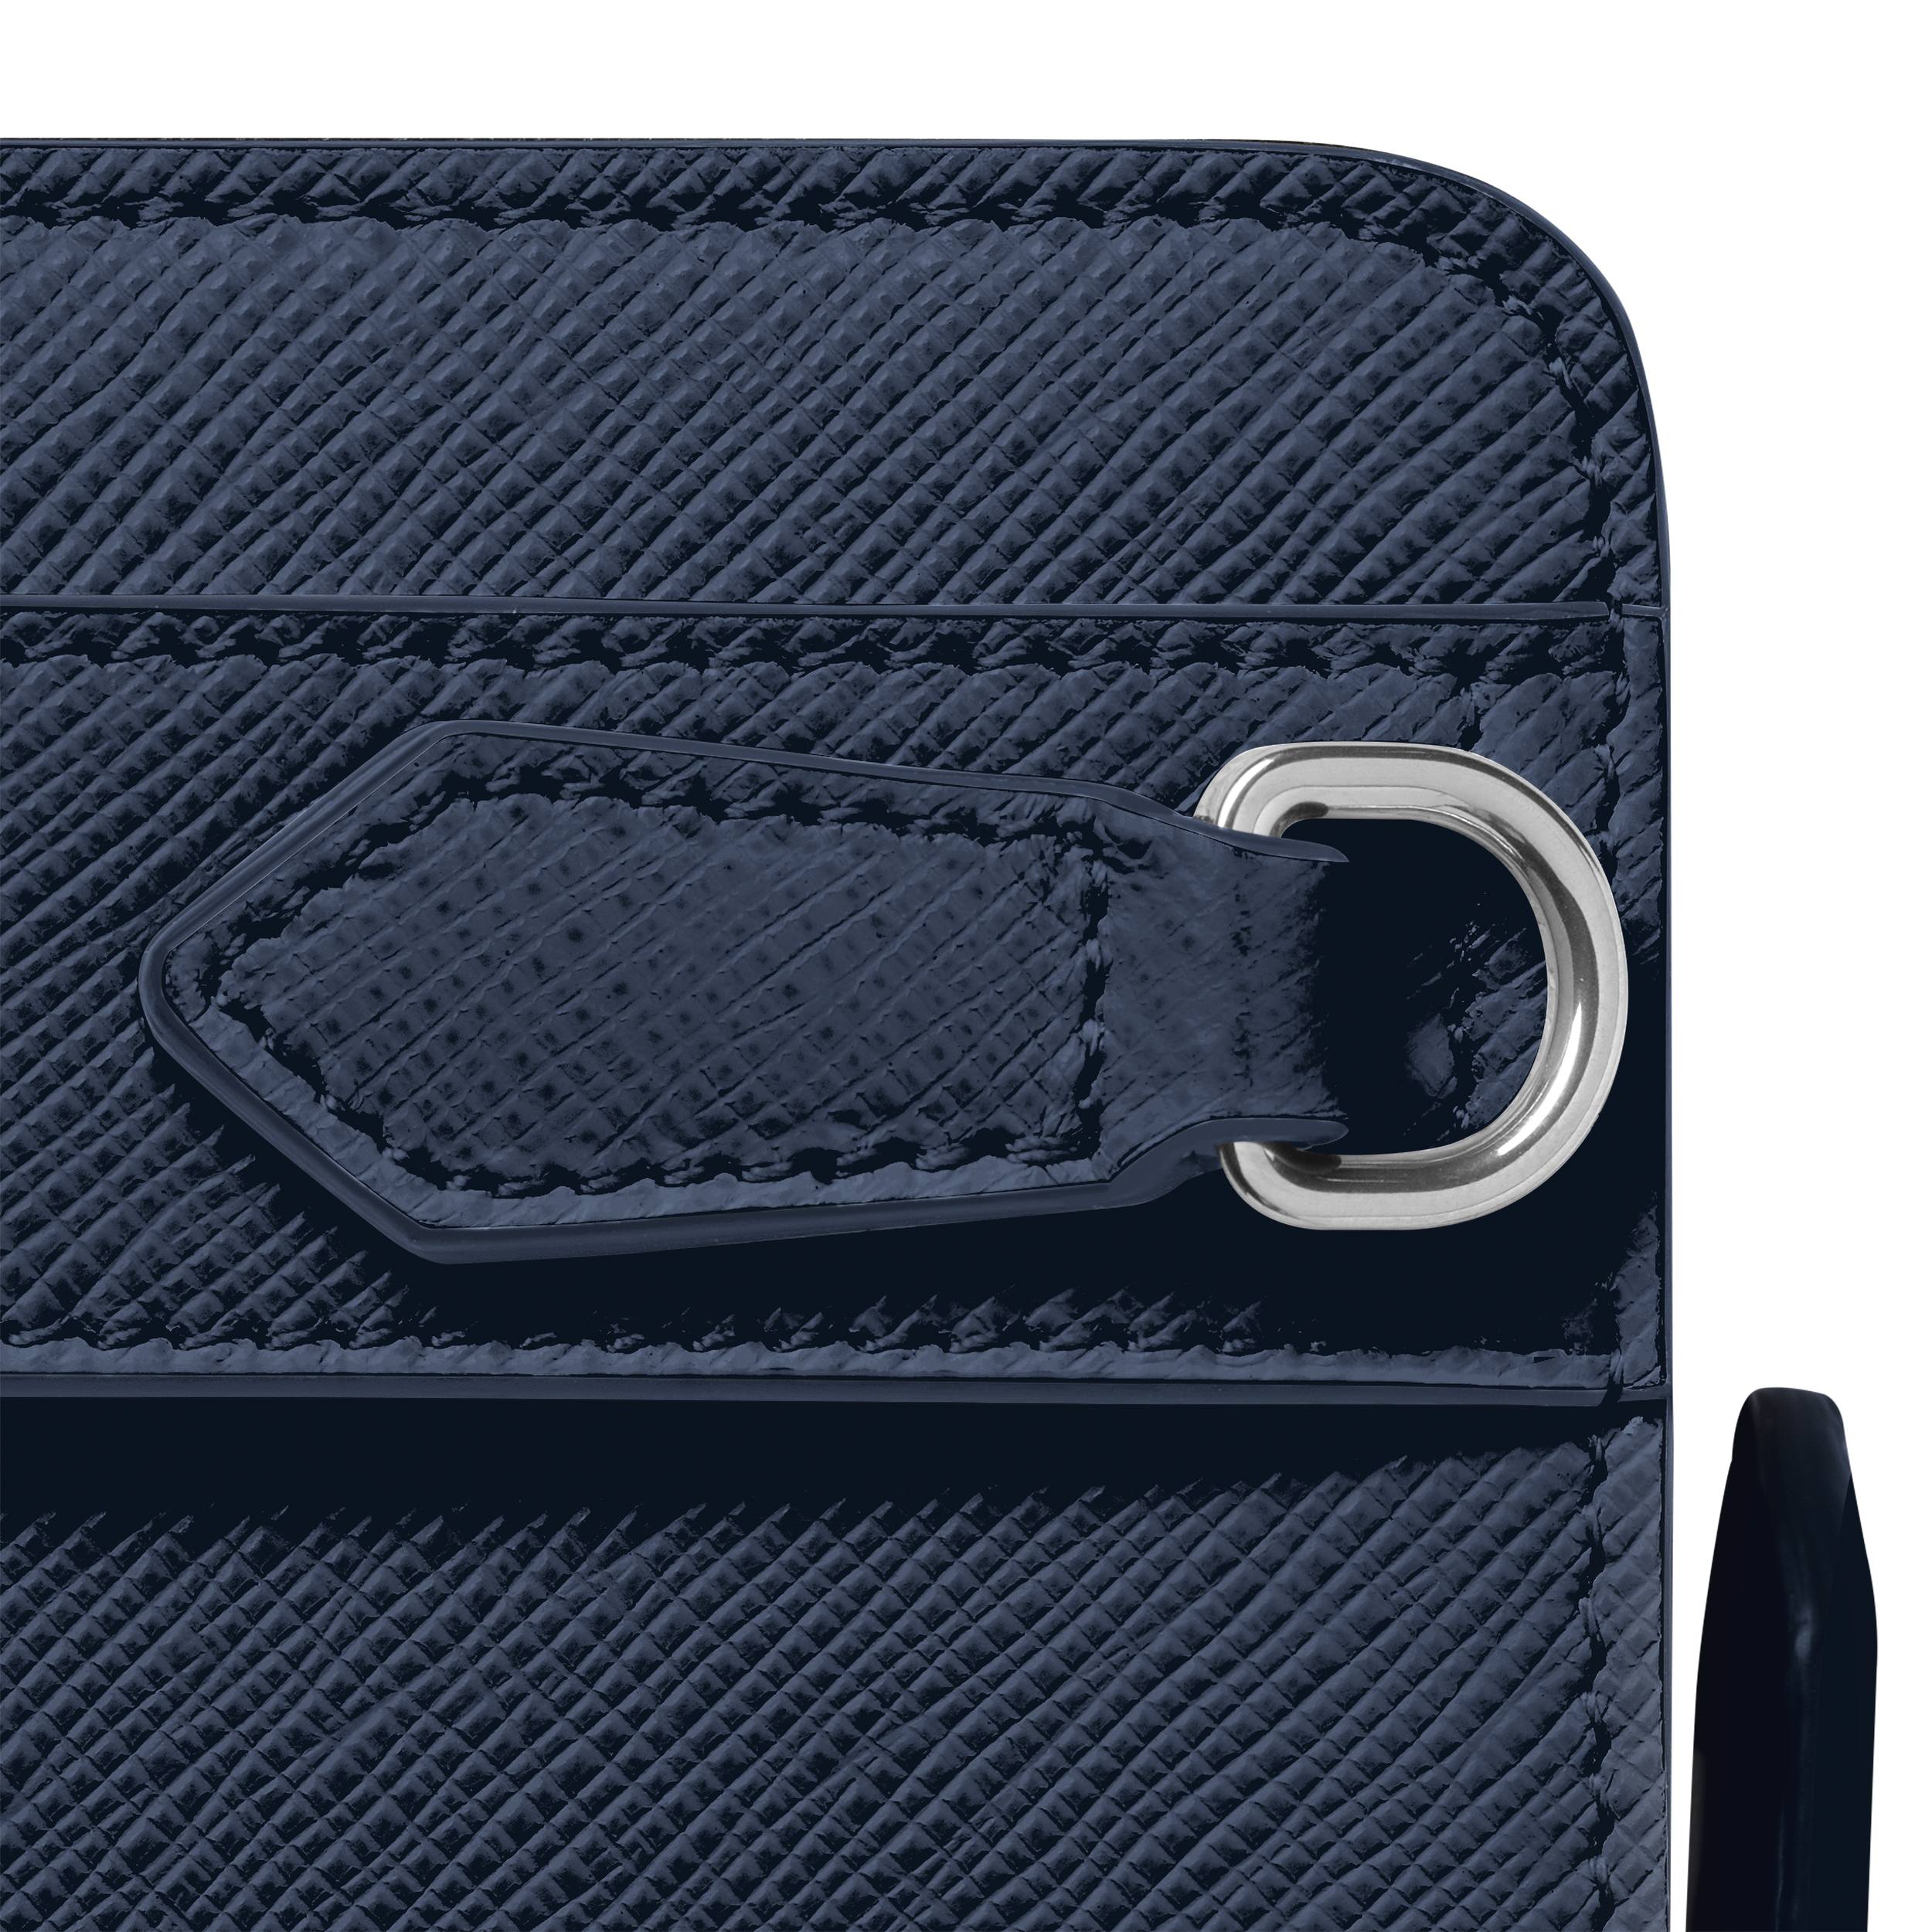 Montblanc Sartorial phone pouch, image 1